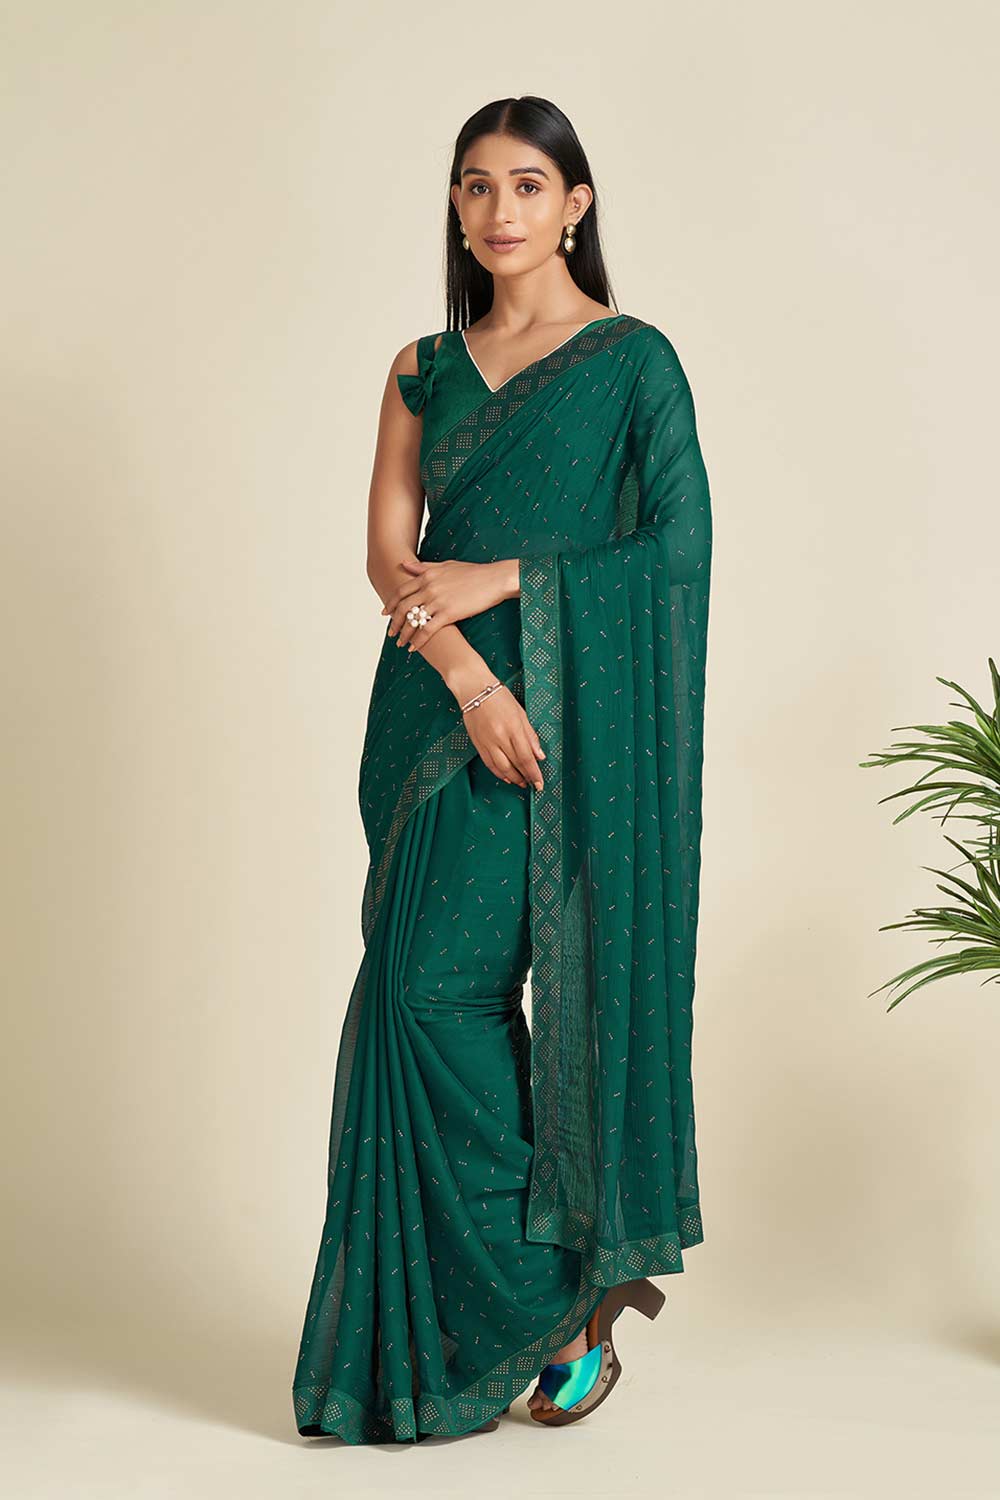 Chelsea Green Faux Satin One Minute Saree